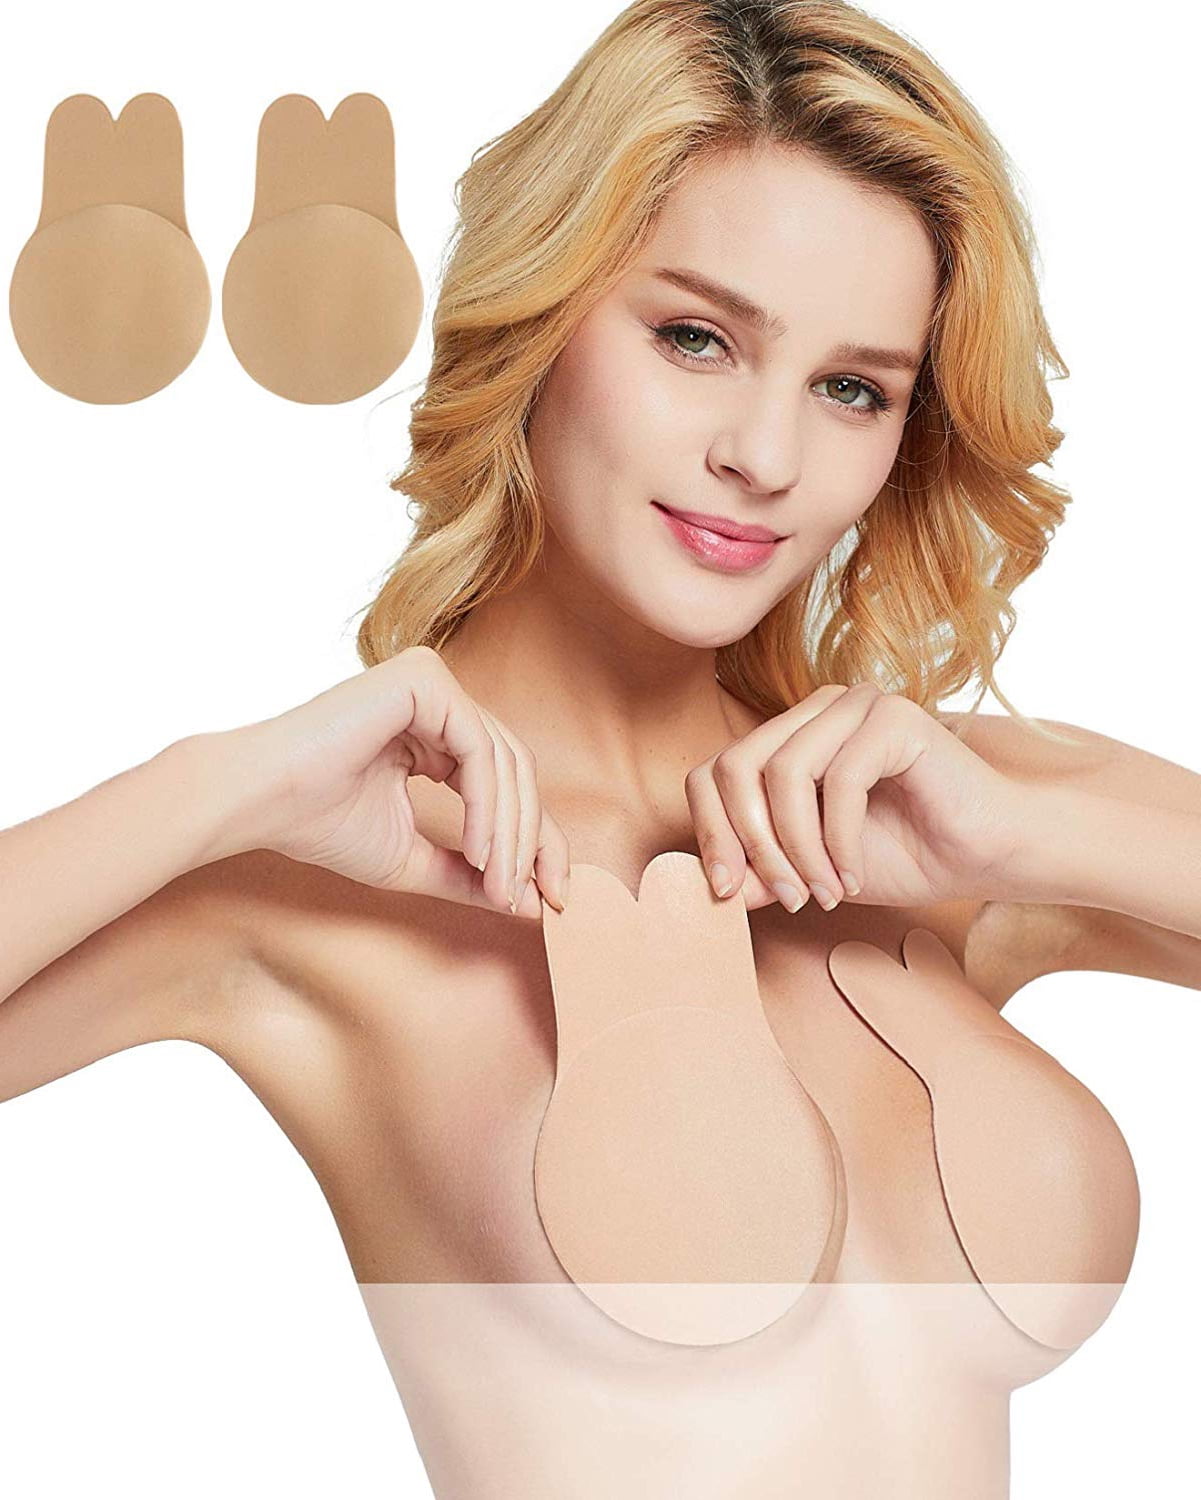 Women Invisible Silicone Rabbit Bra Strapless Self-Adhesive Lift Up Nipple Cover 